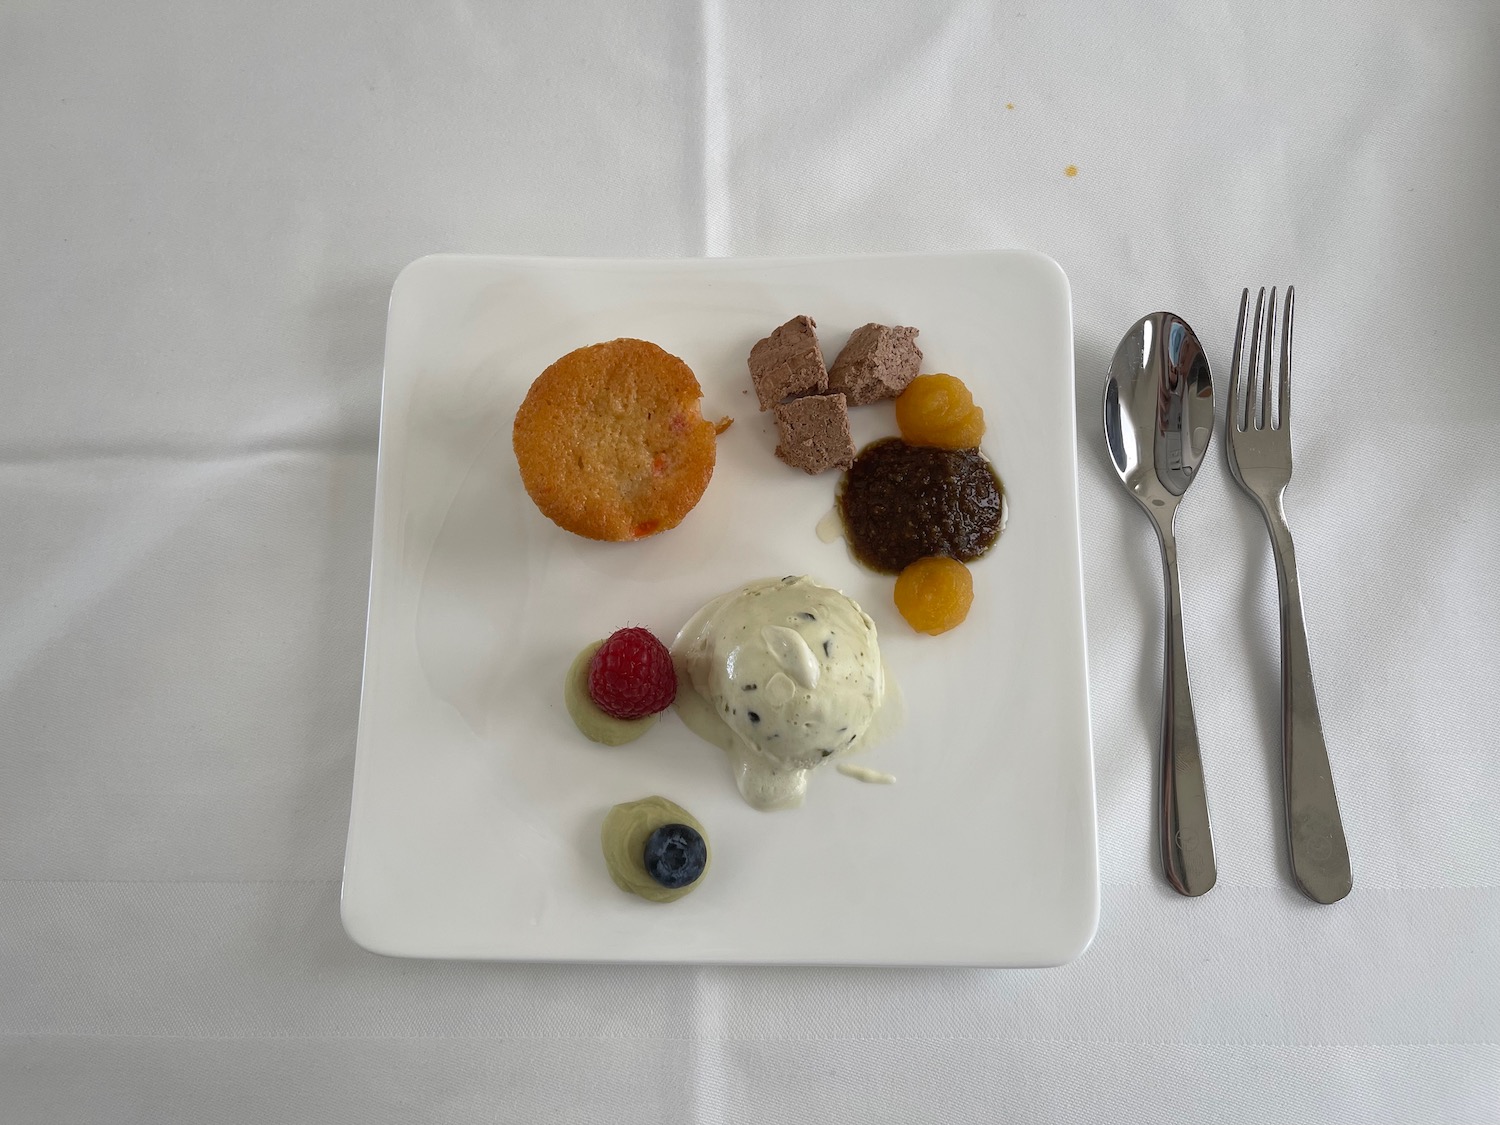 a plate of desserts and spoons